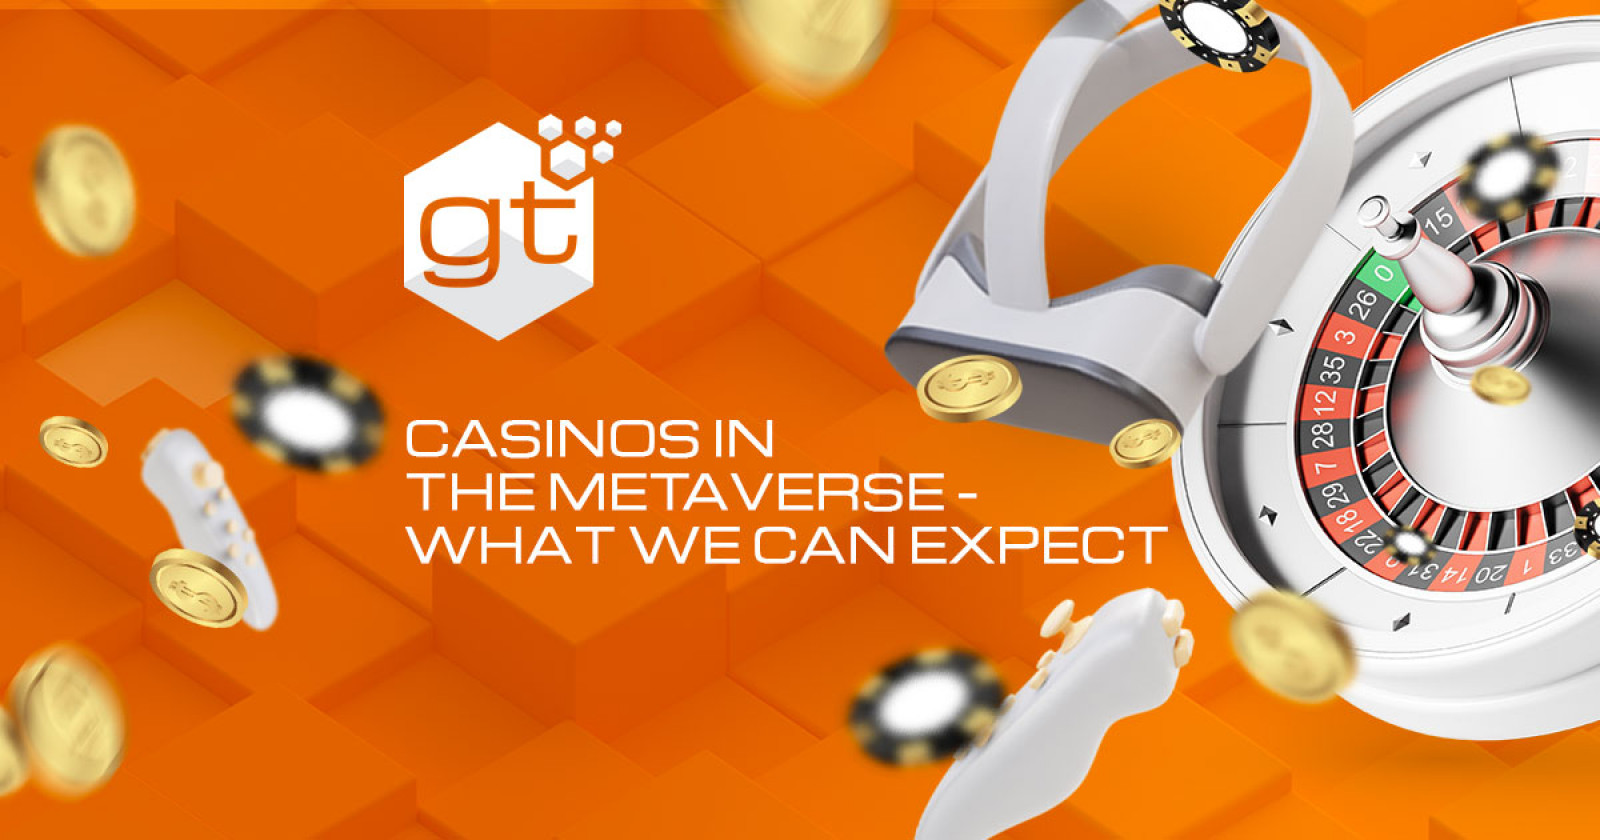 Casinos in the Metaverse - what we can expect